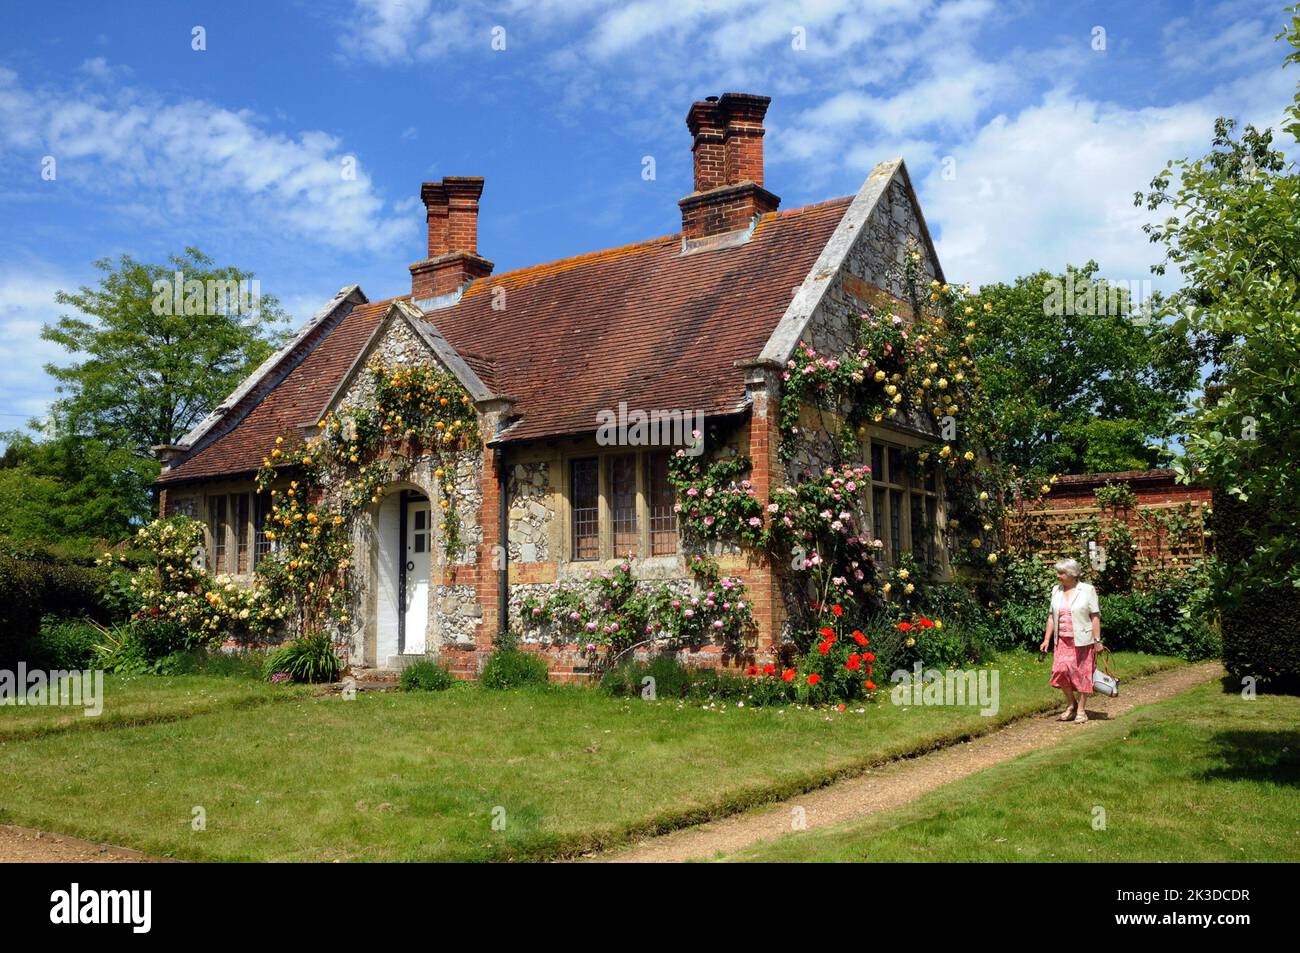 The Gatehouse at the Natiobnal Trusts Mottisfont Abbey conveys a typical English summer scene as the rambling roses bloom on its walls Pic Mike Walker, Mike Walker Pictures,2015 Stock Photo